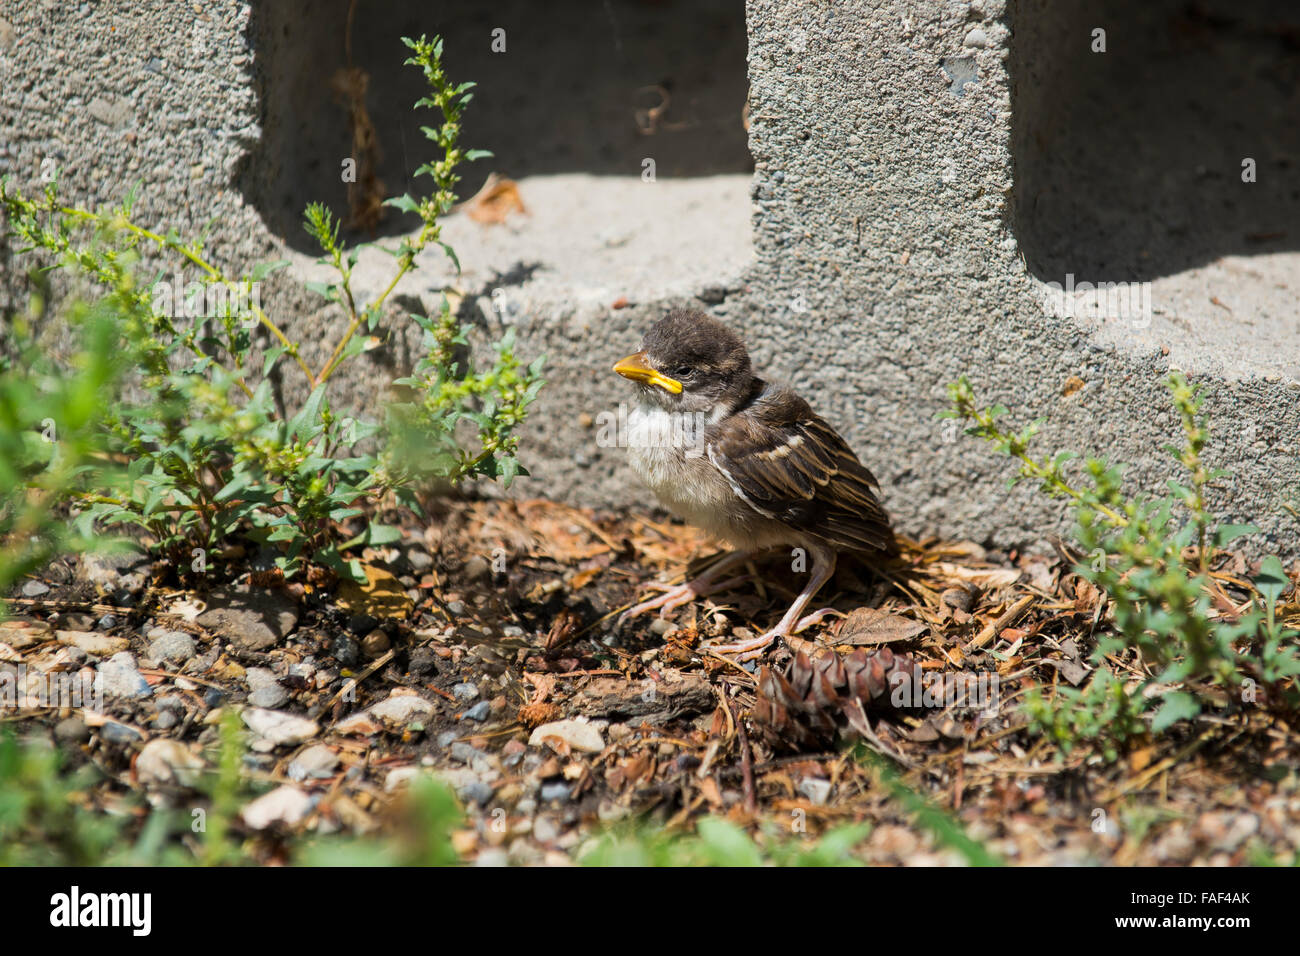 Helpless baby sparrow chick Stock Photo